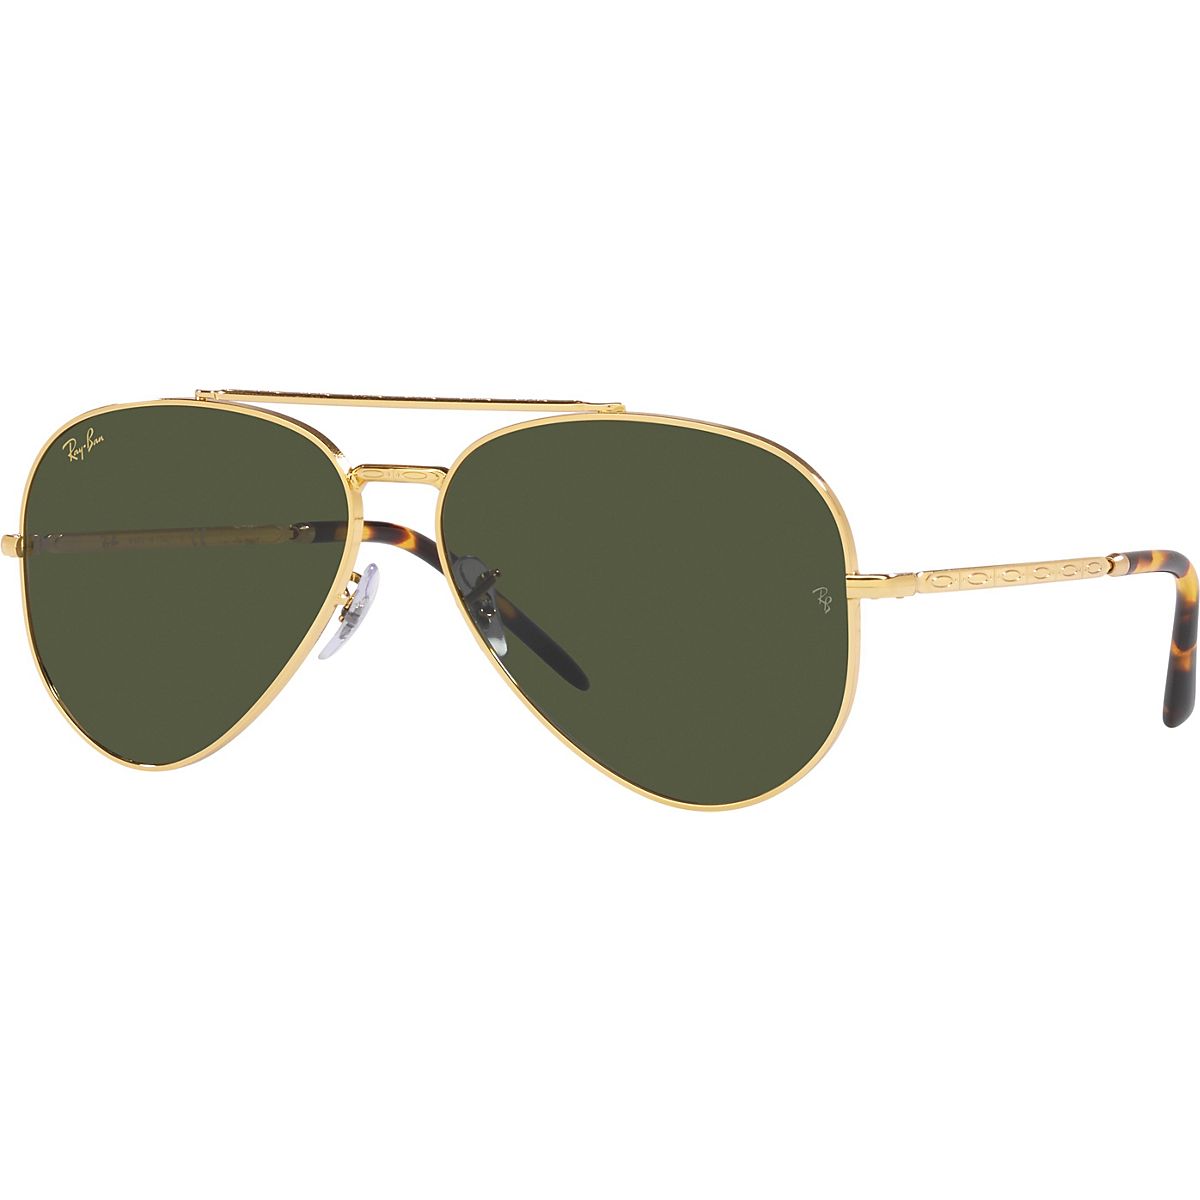 Ray-Ban New Legend Aviator Sunglasses | Free Shipping at Academy